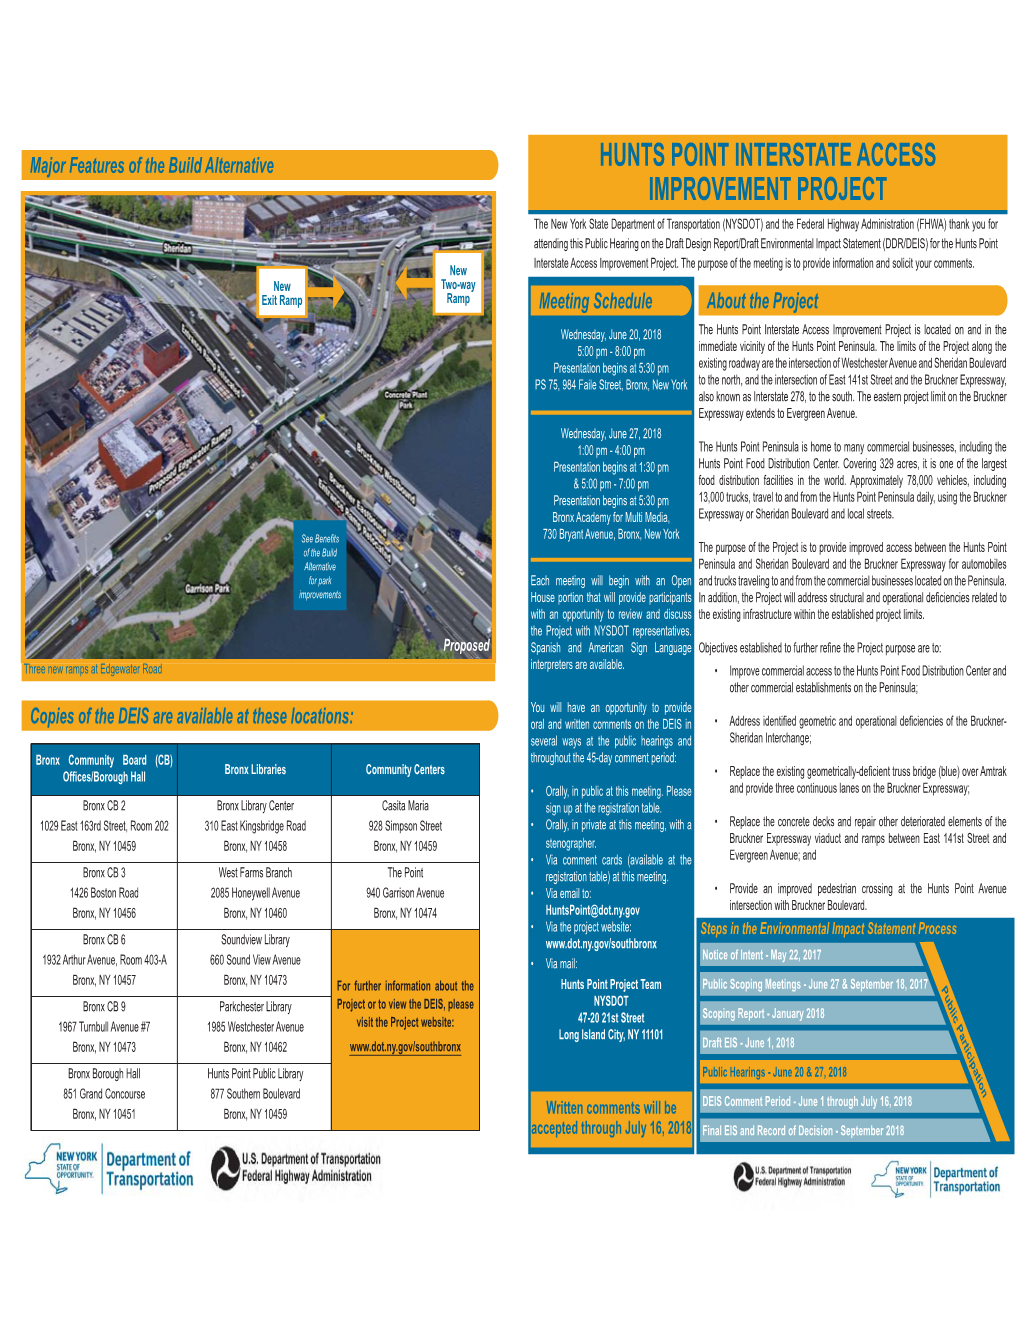 Hunts Point Interstate Access Improvement Project